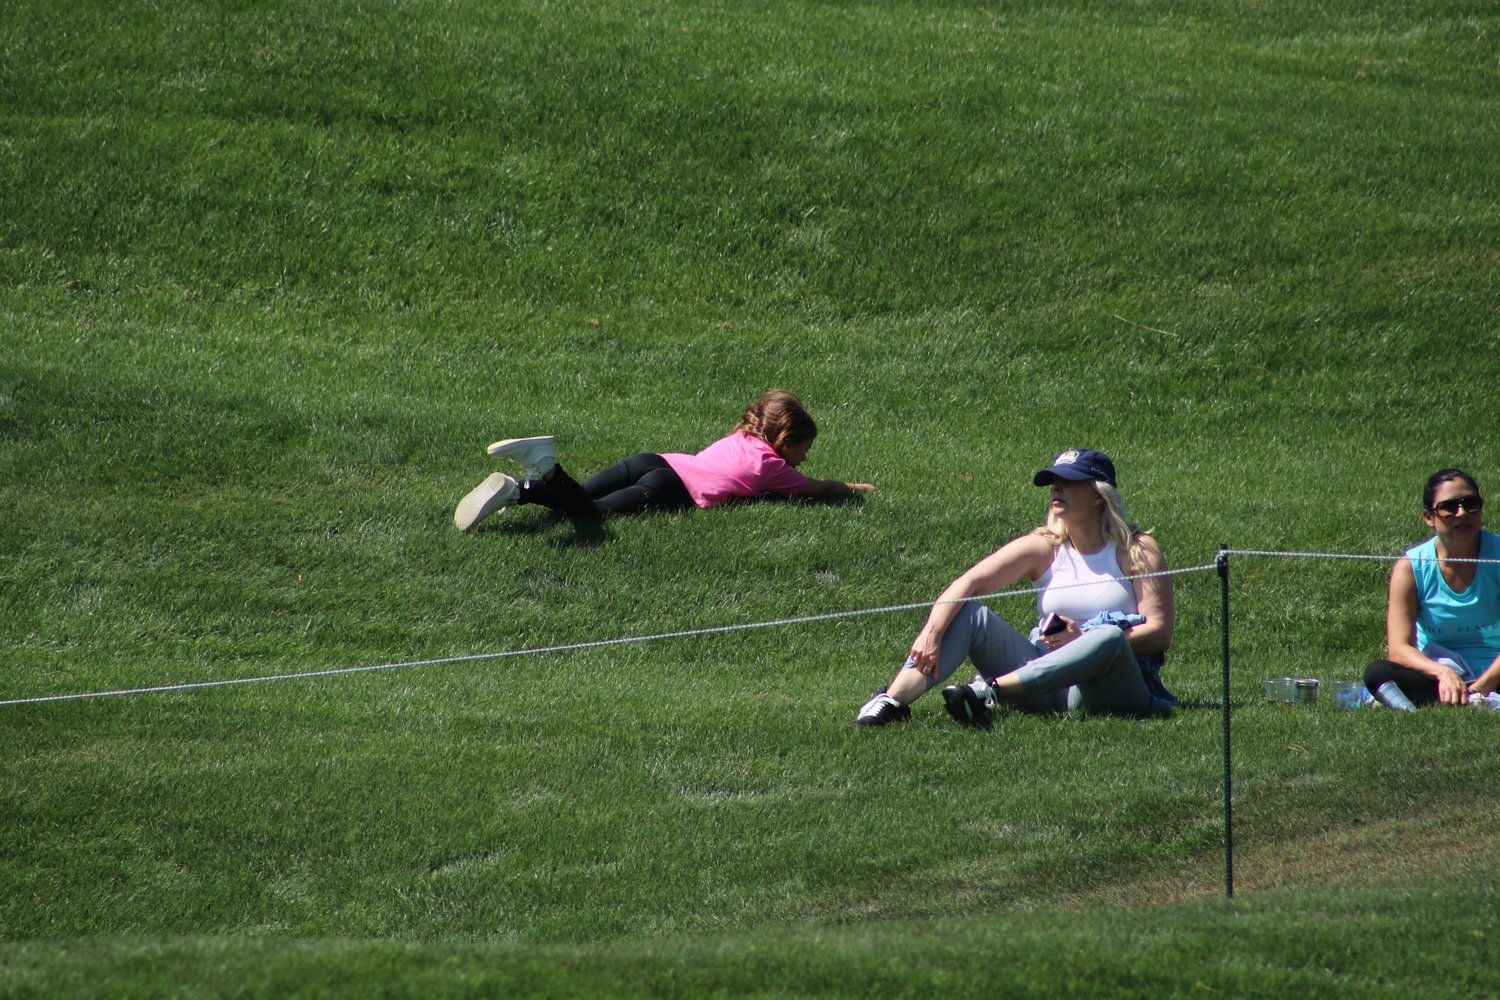 Children rolling down a hill is a popular pastime at THE PLAYERS.